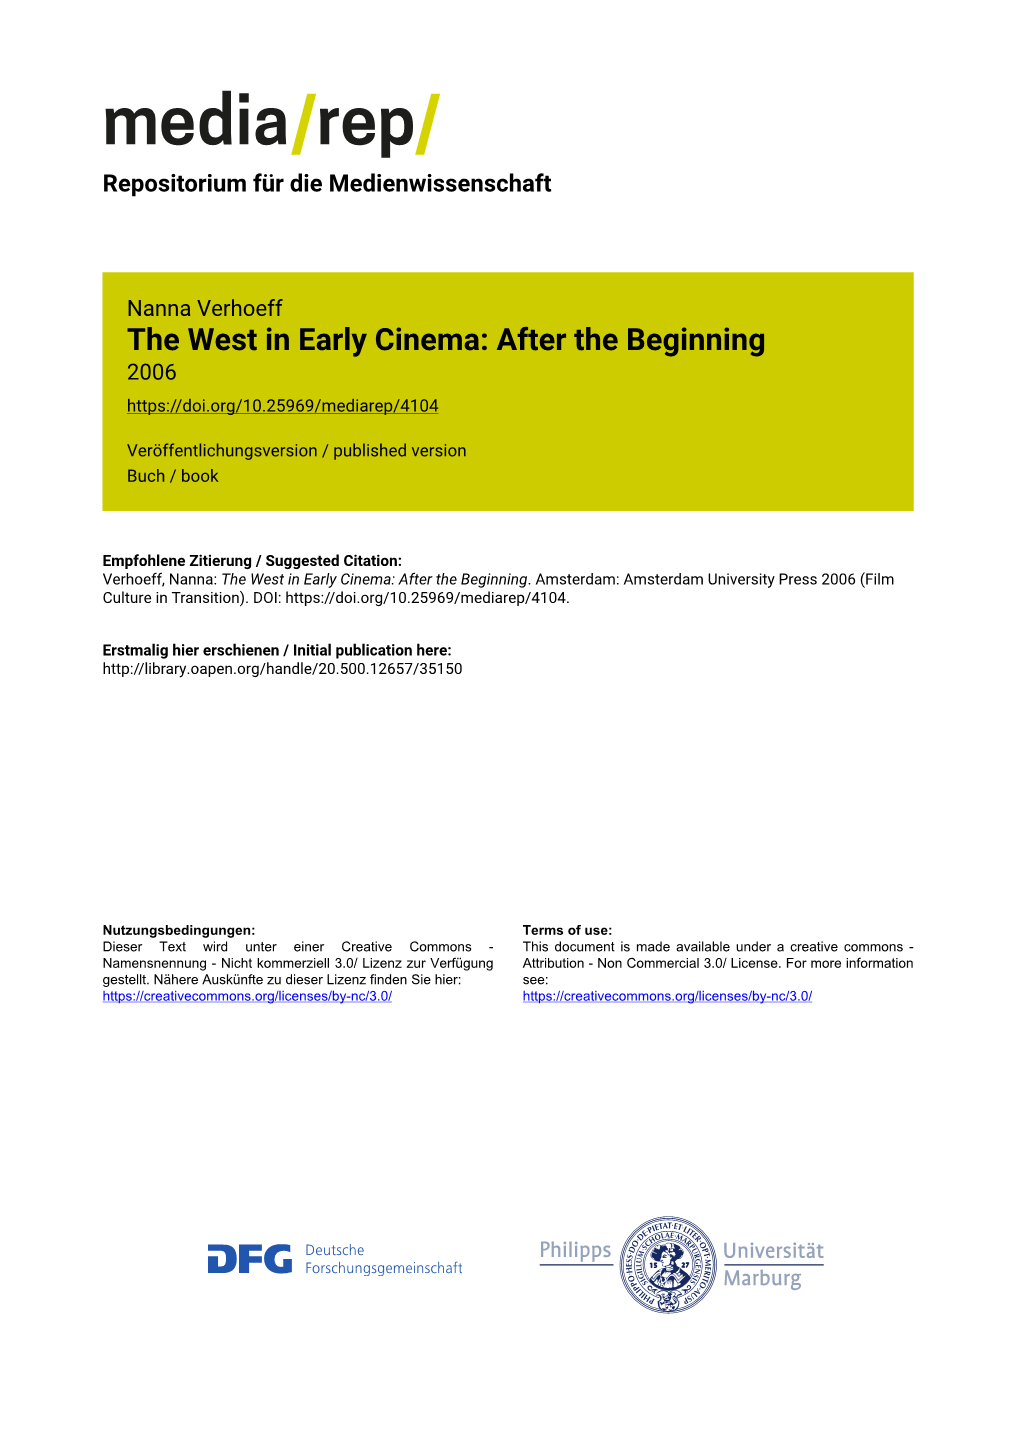 The West in Early Cinema: After the Beginning 2006